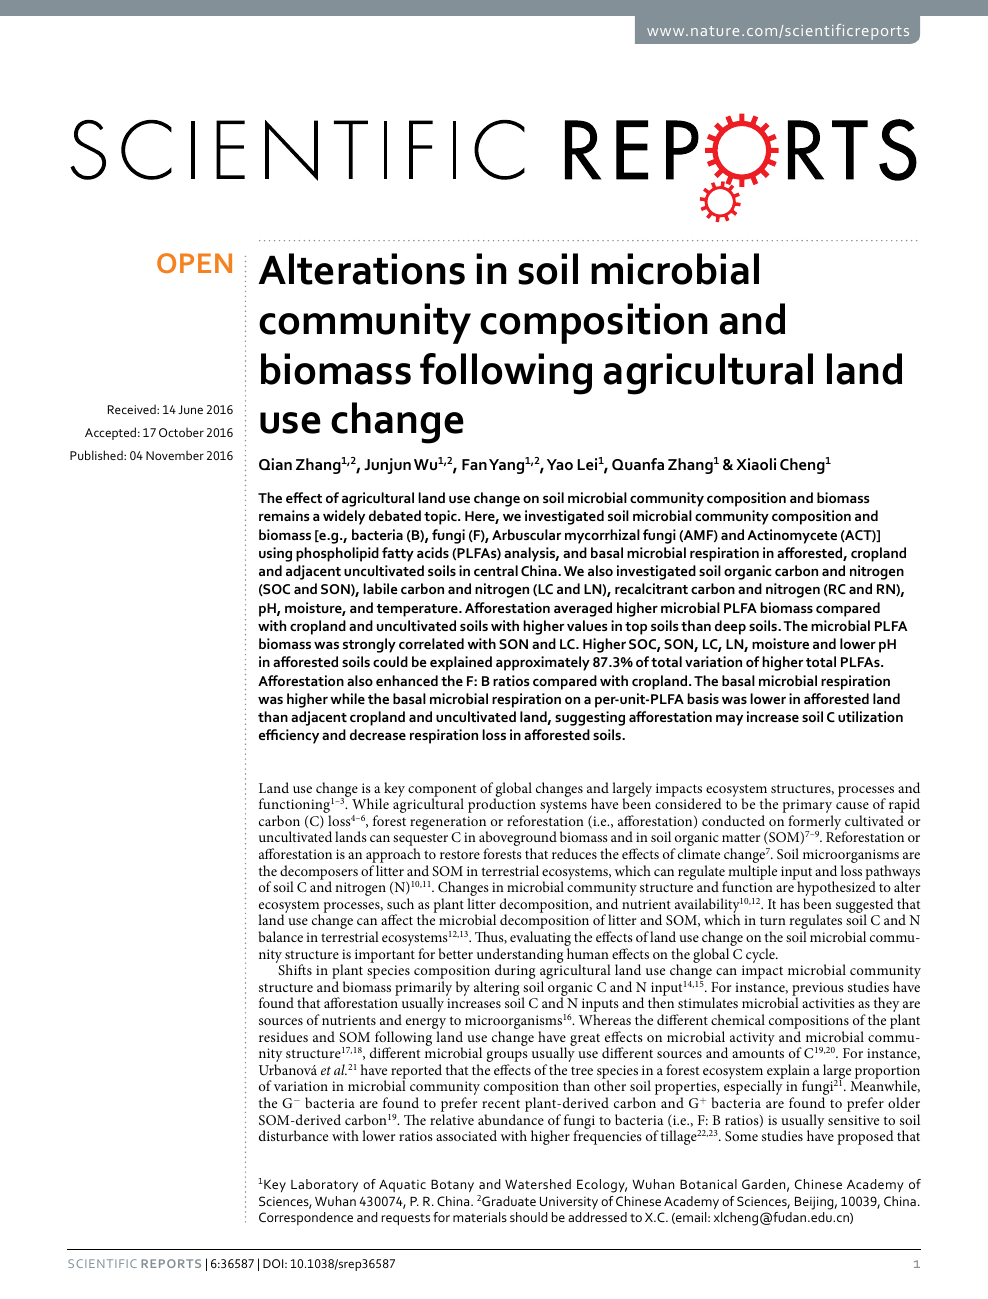 Alterations In Soil Microbial Community Composition And Biomass